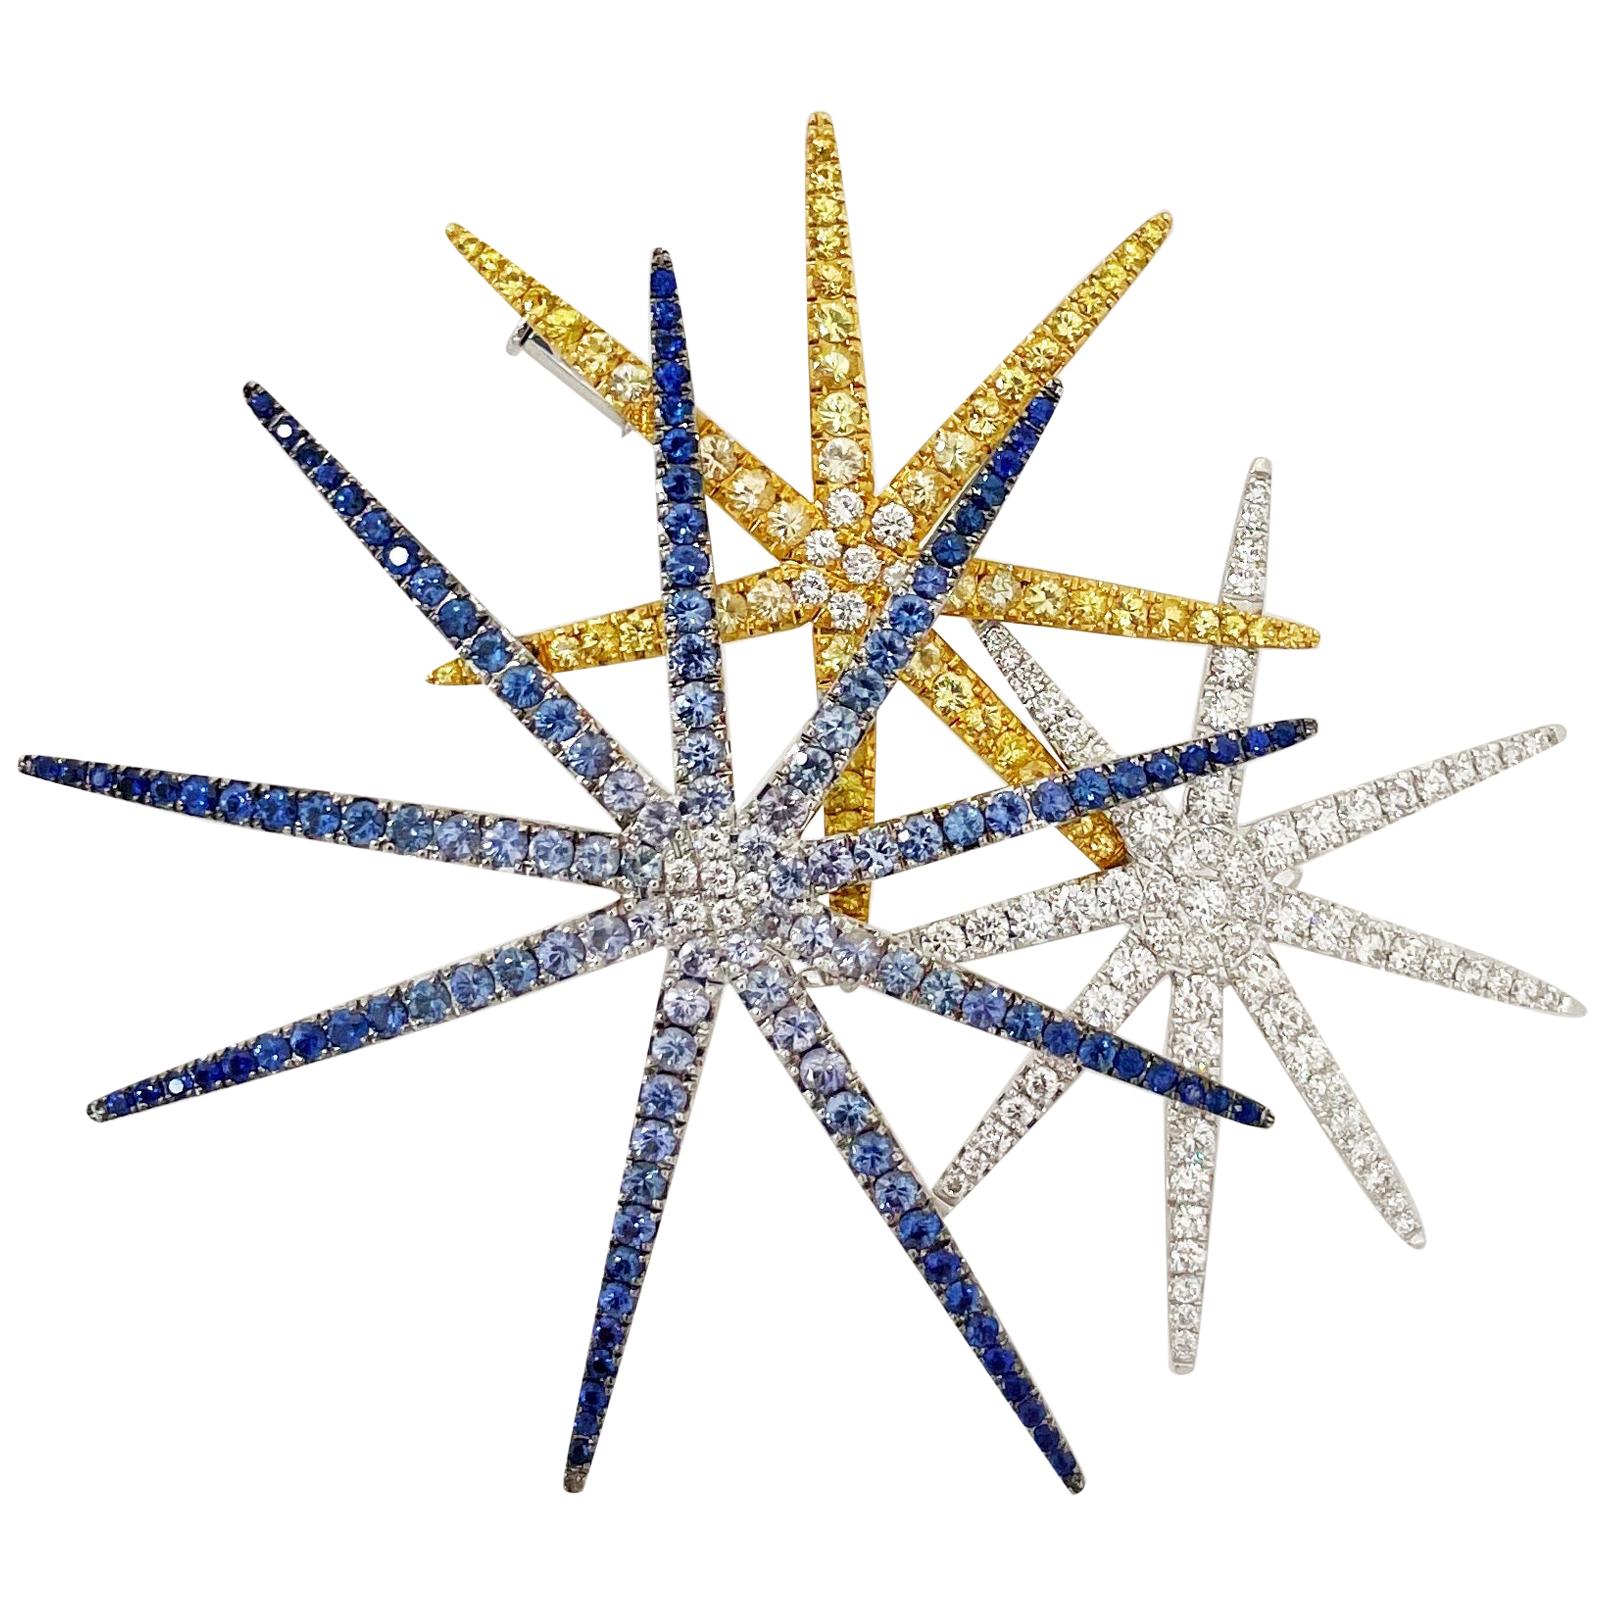 Cellini 18 Karat WG, Fireworks Brooch with Blue & Yellow Sapphires and Diamonds